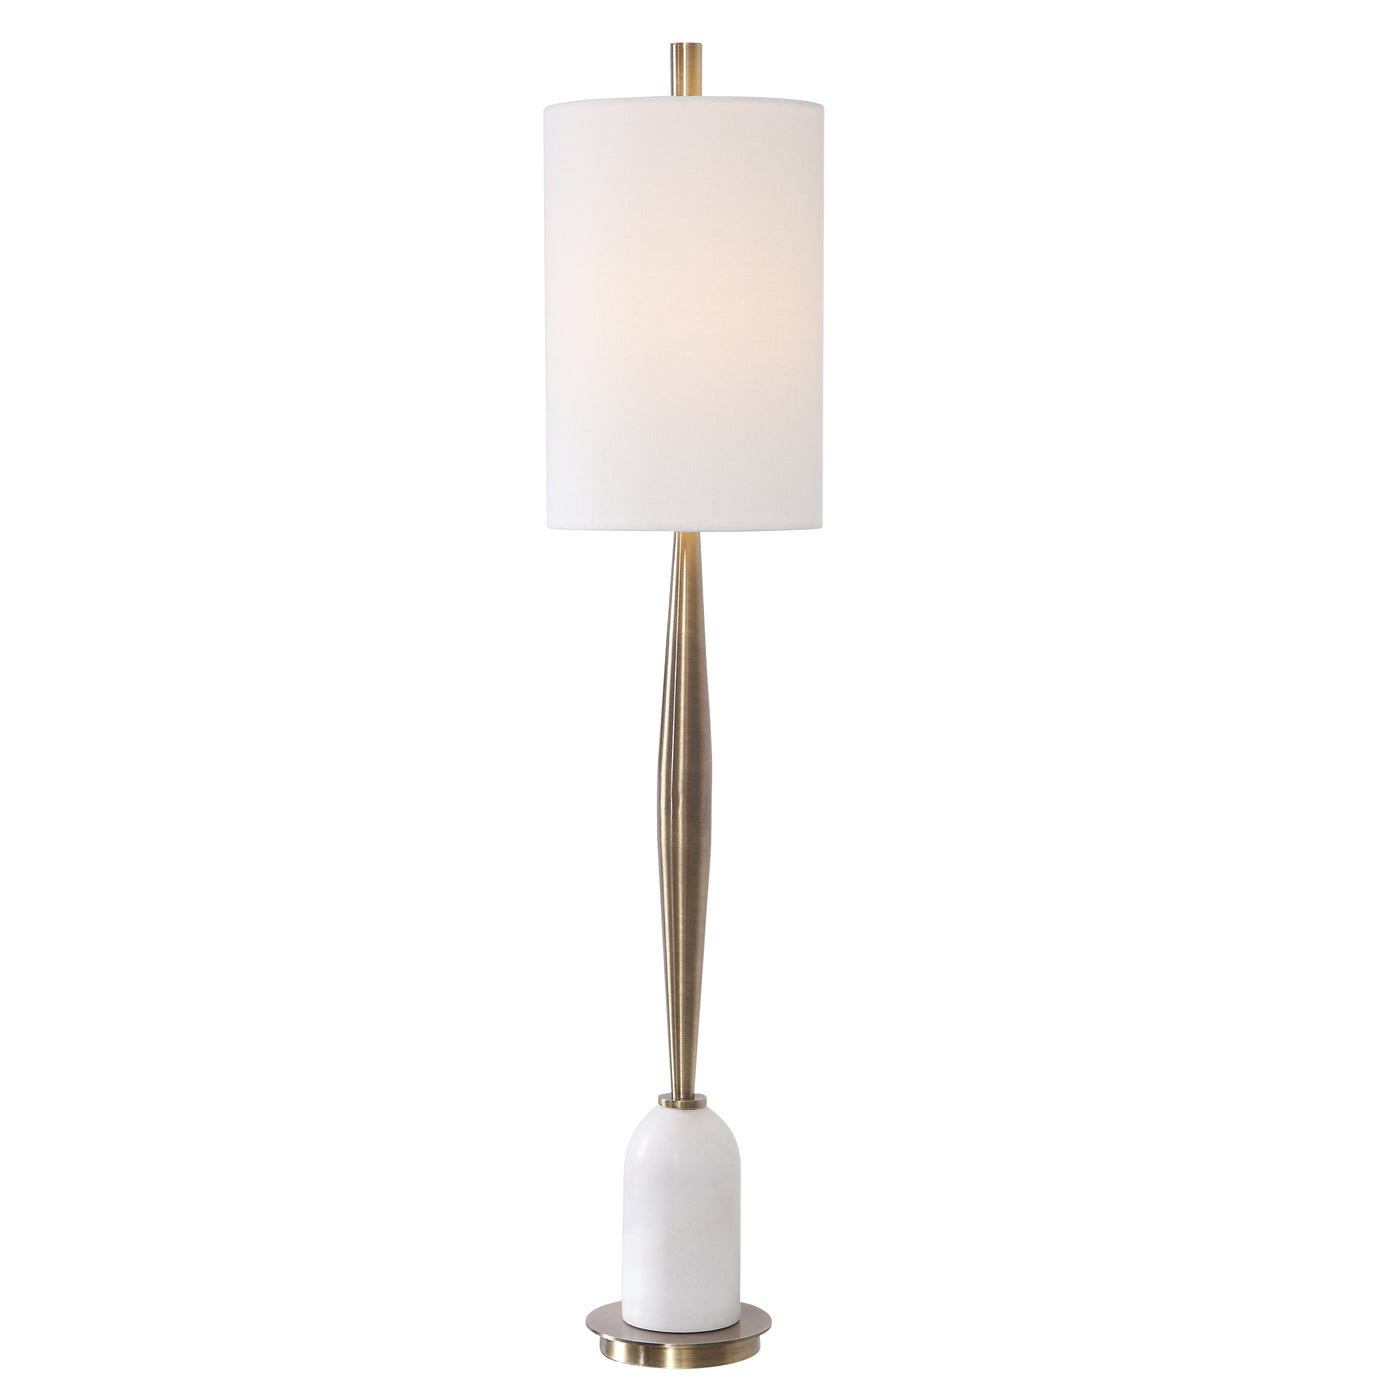 Transitional In Design, This Buffet Lamp Has A Tapered Base Finished In A Plated Antique Brass, Accented With A Polished W...